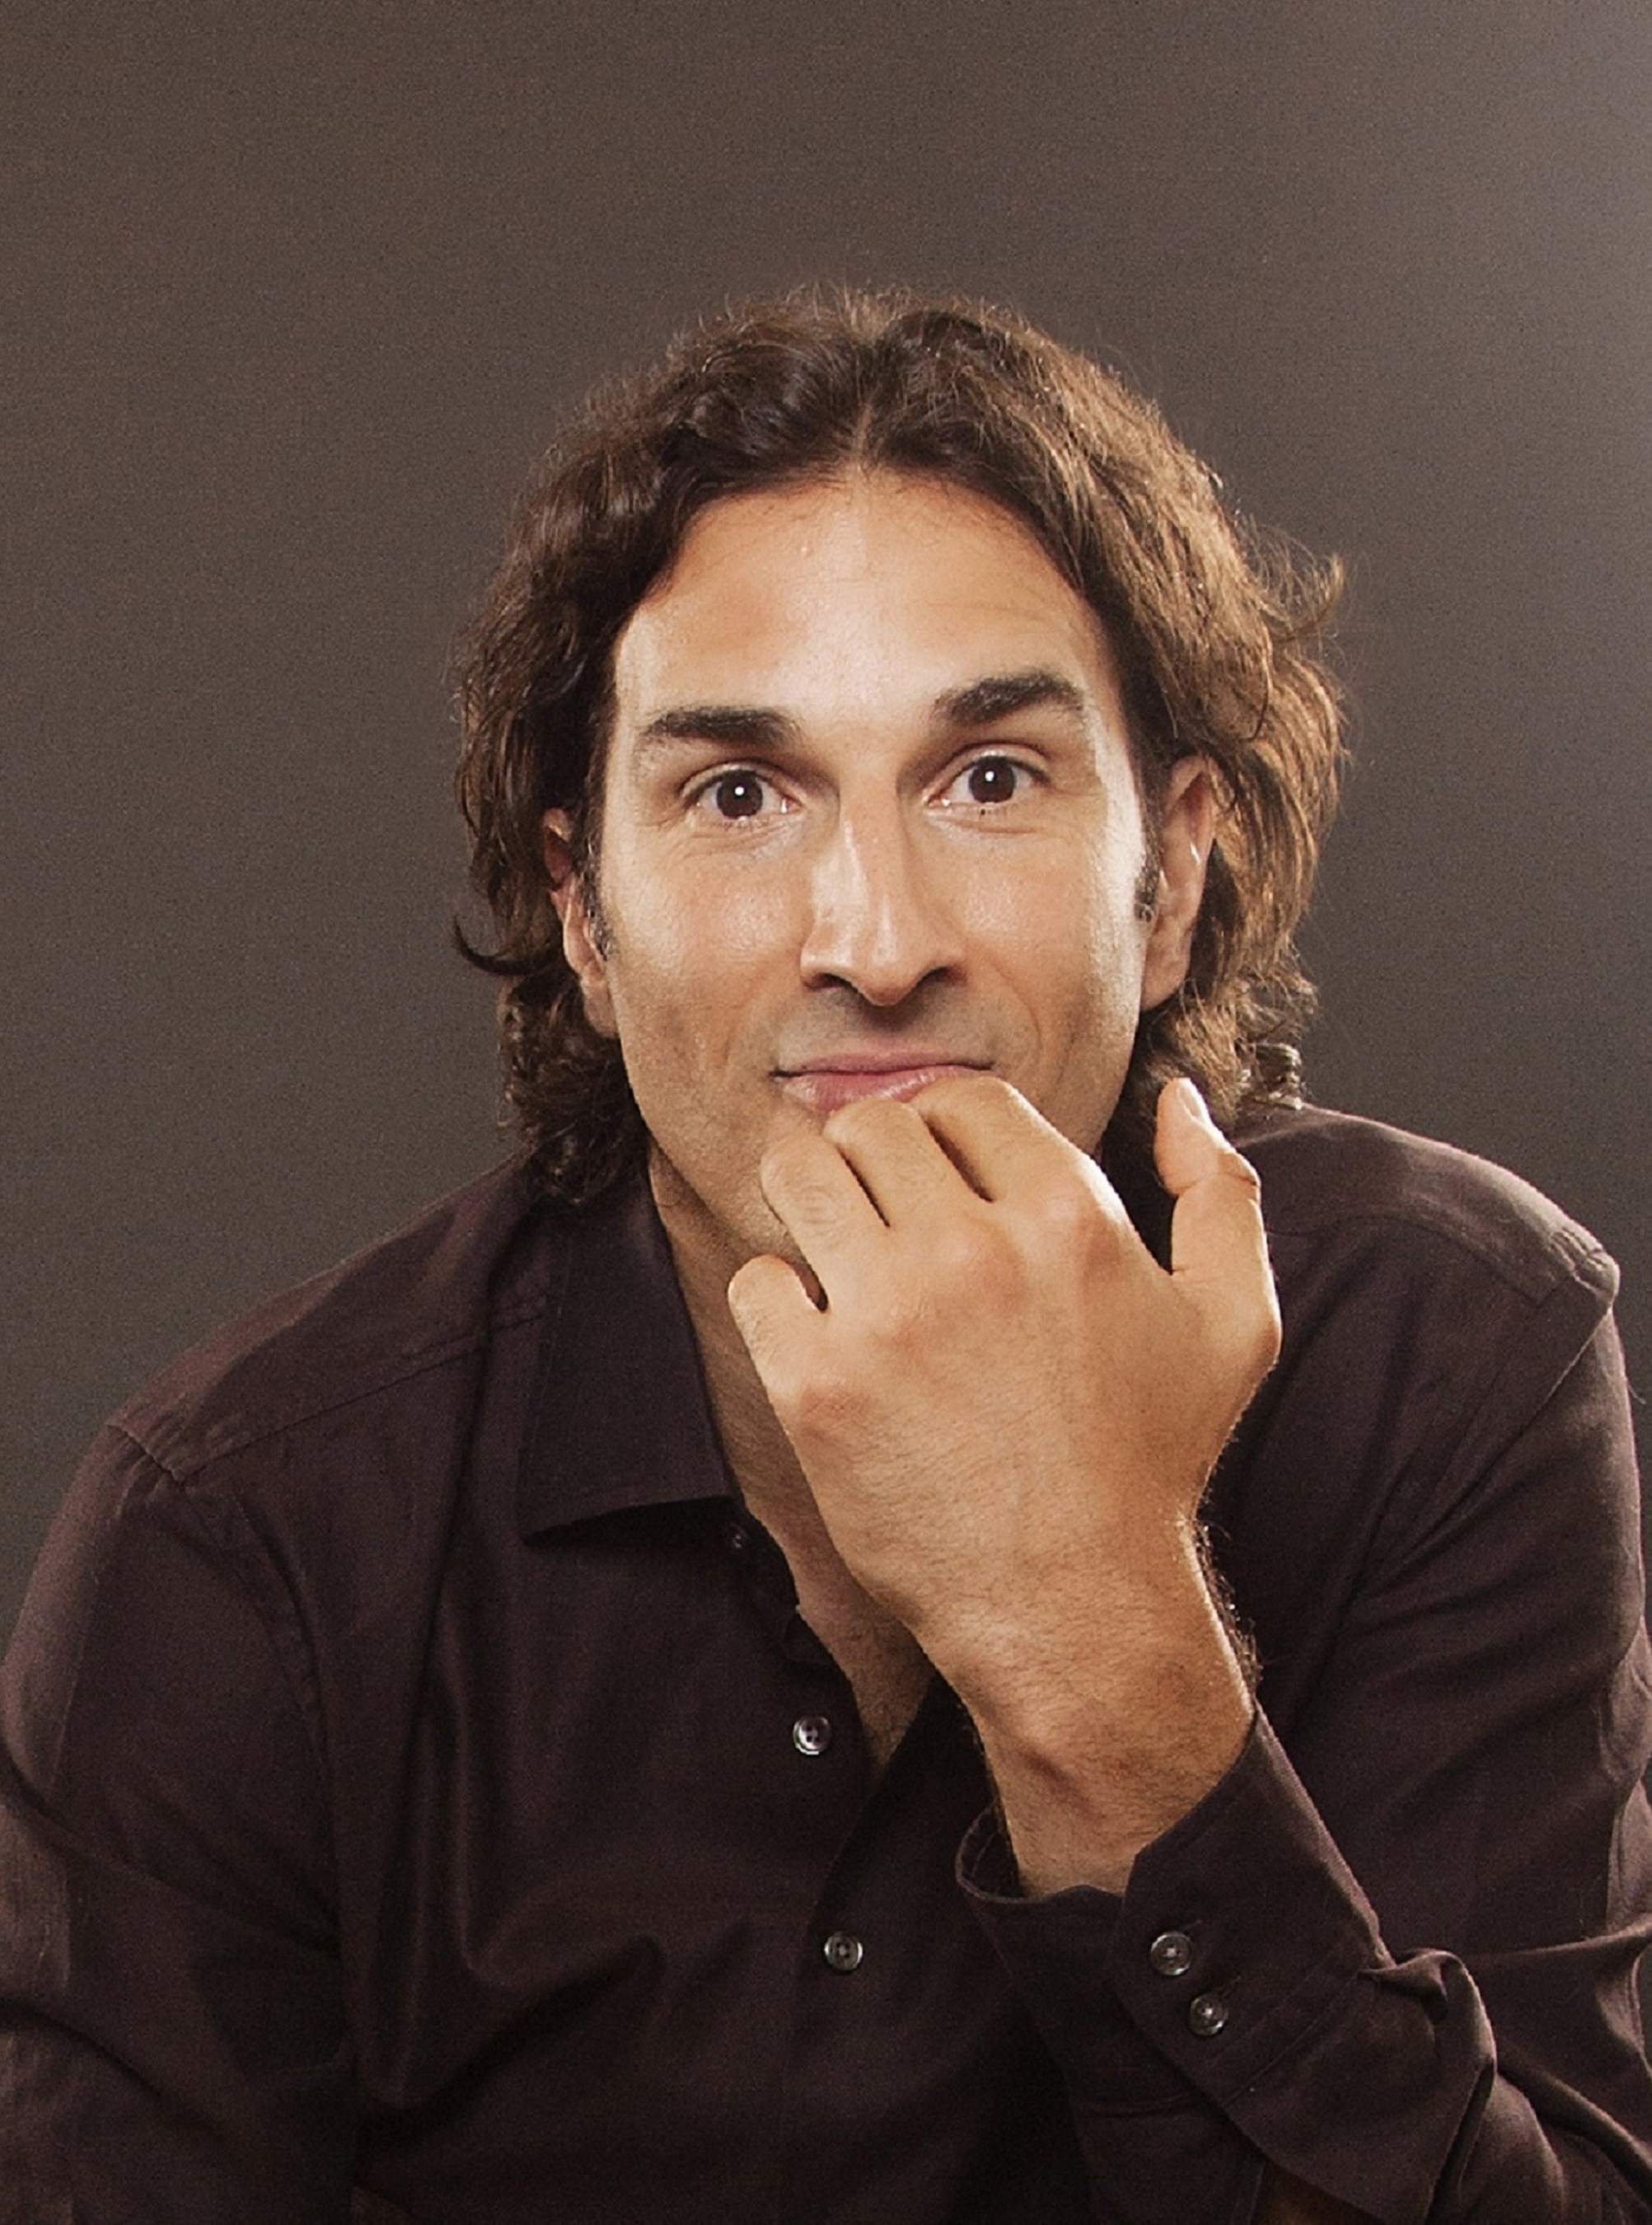 Comedian and Last Comic Standing finalist Gary Gulman will perform at the R Baby Foundation's Stand Up and Celebrate Gala on November 30 at The Plaza Hotel in New York City. Tickets may be purchased at www.rbabyfoundation.org. The event benefits pediatric emergency healthcare programs.